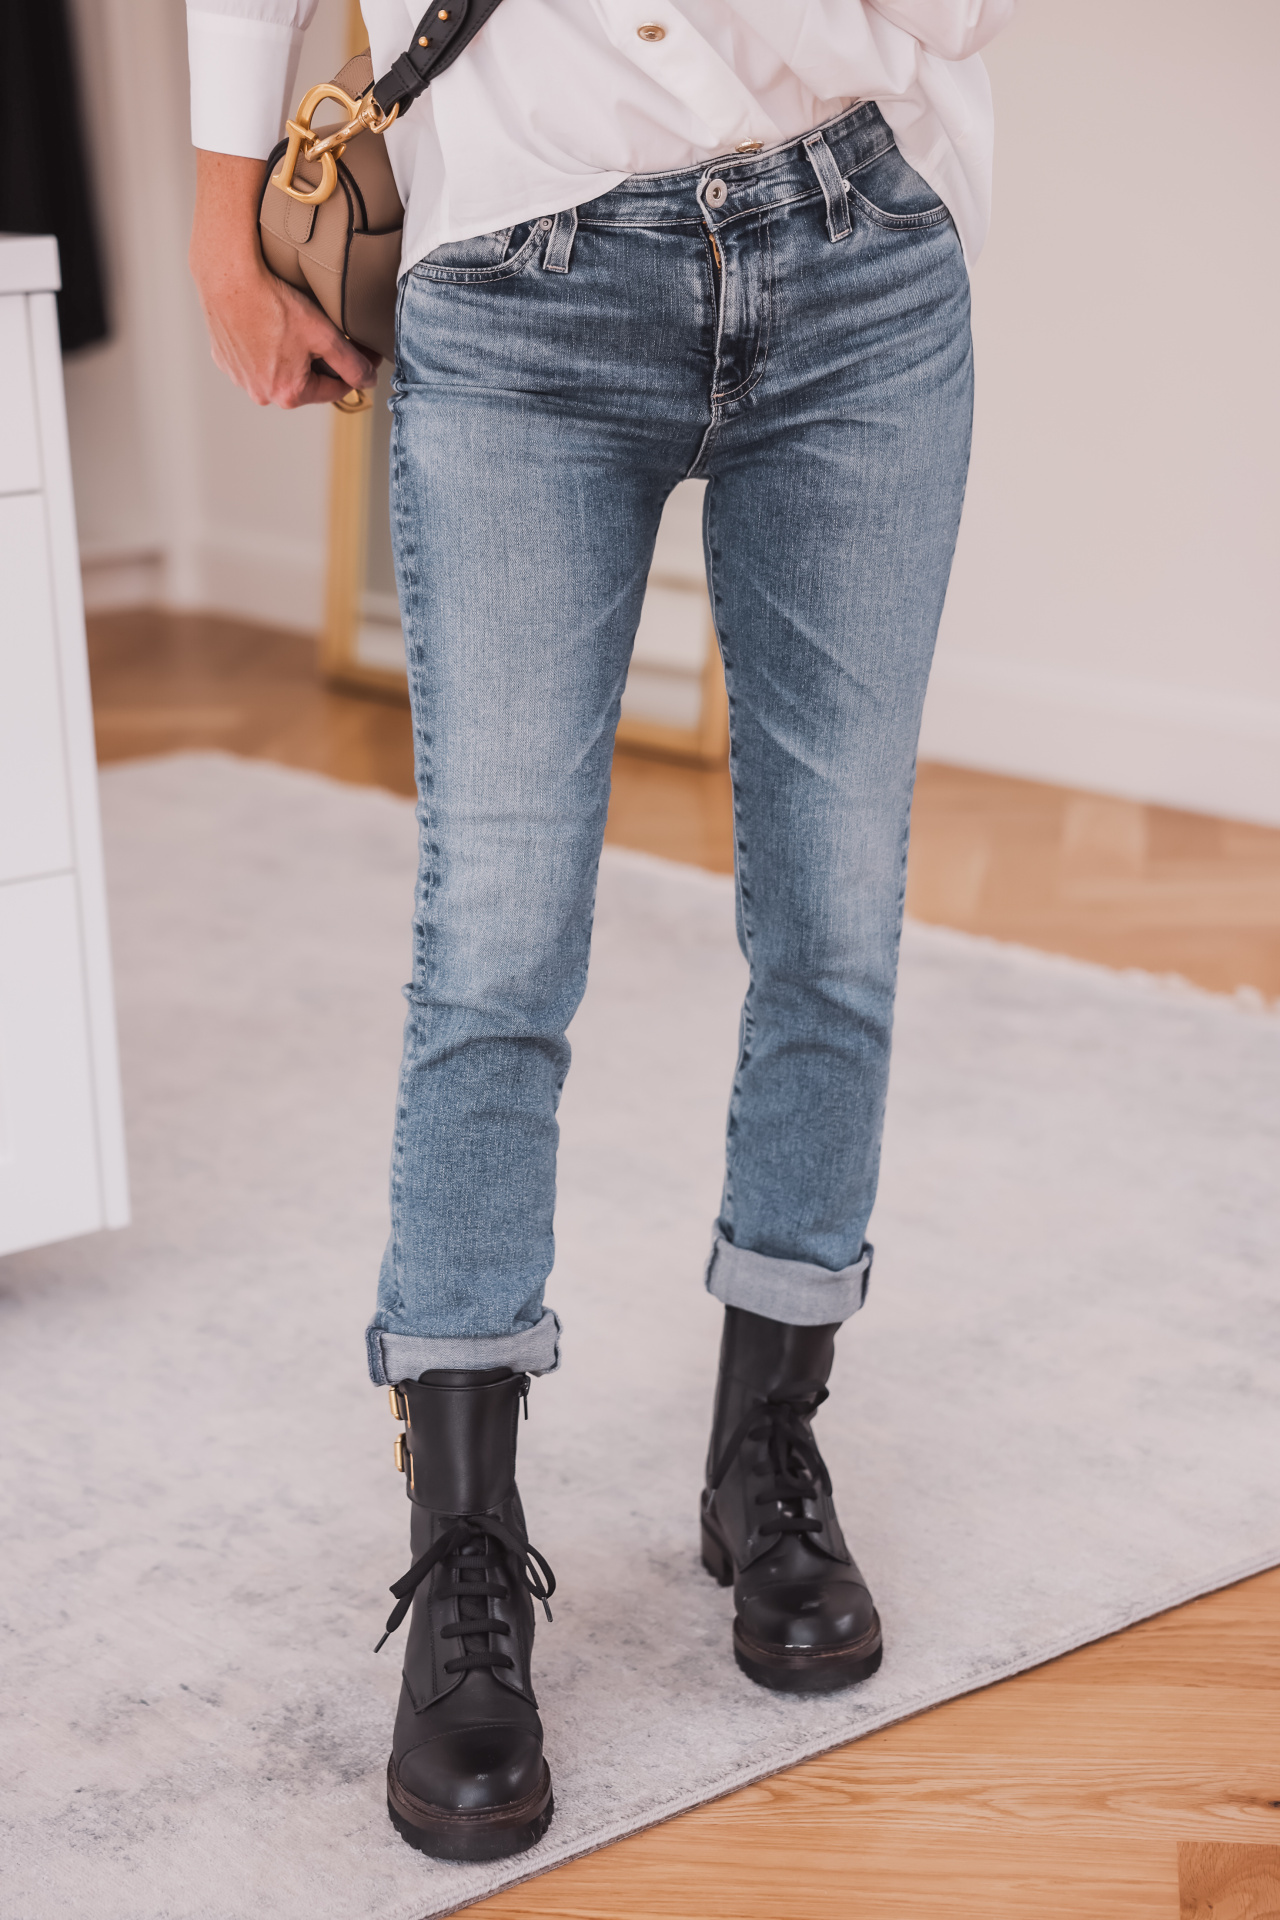 jeans with boots outfit